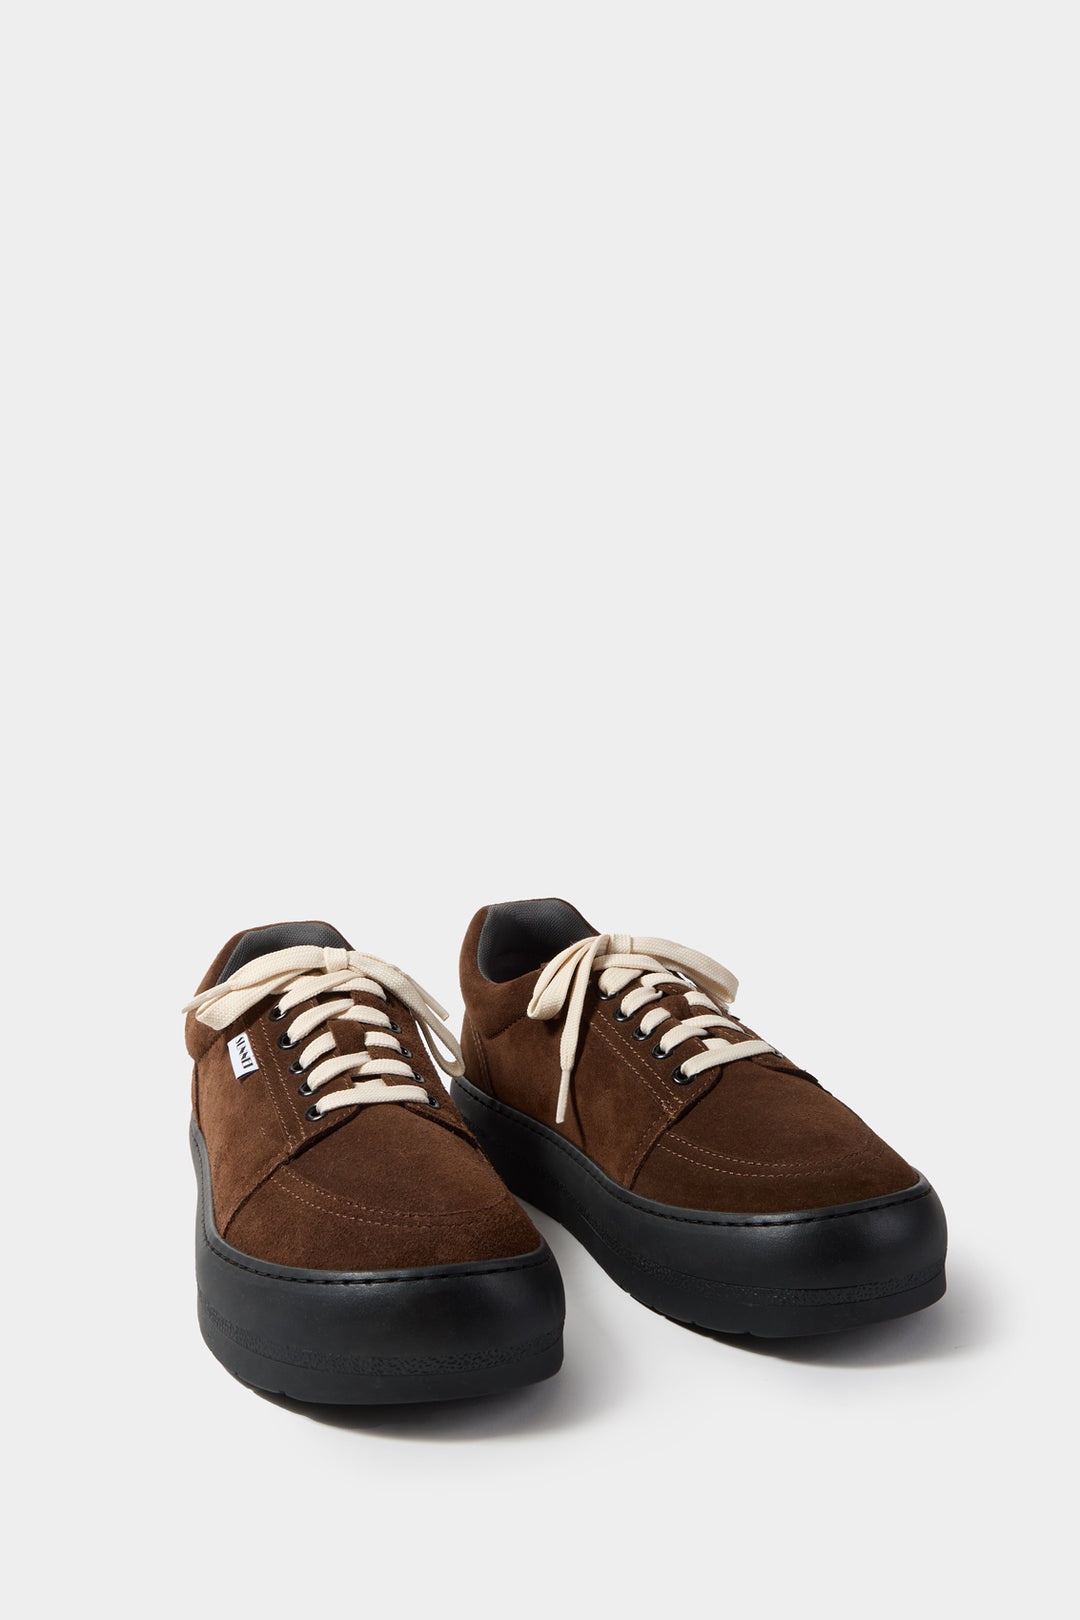 DREAMY SHOES / suede / chocolate - 2